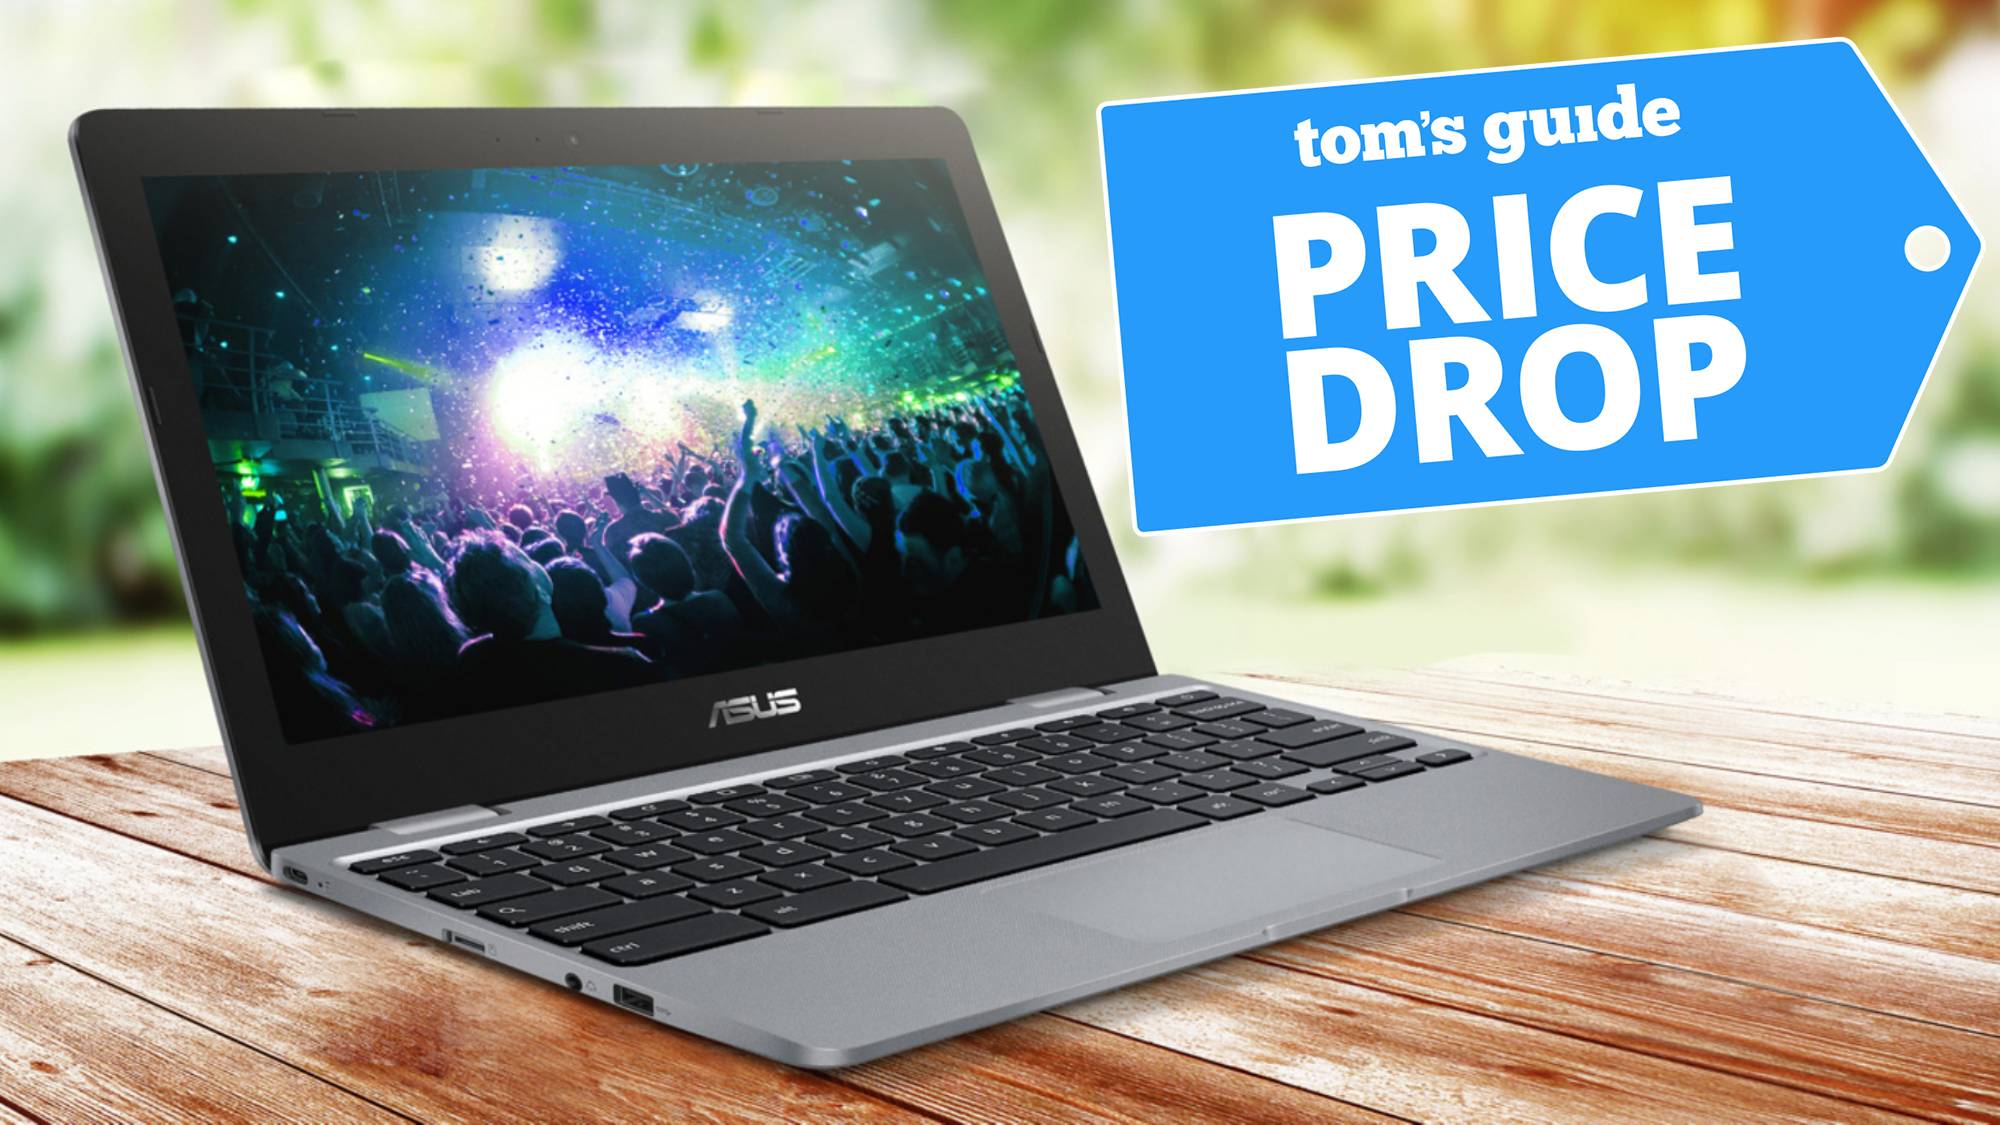 Asus C423 Chromebook with a Tom's Guide deal tag